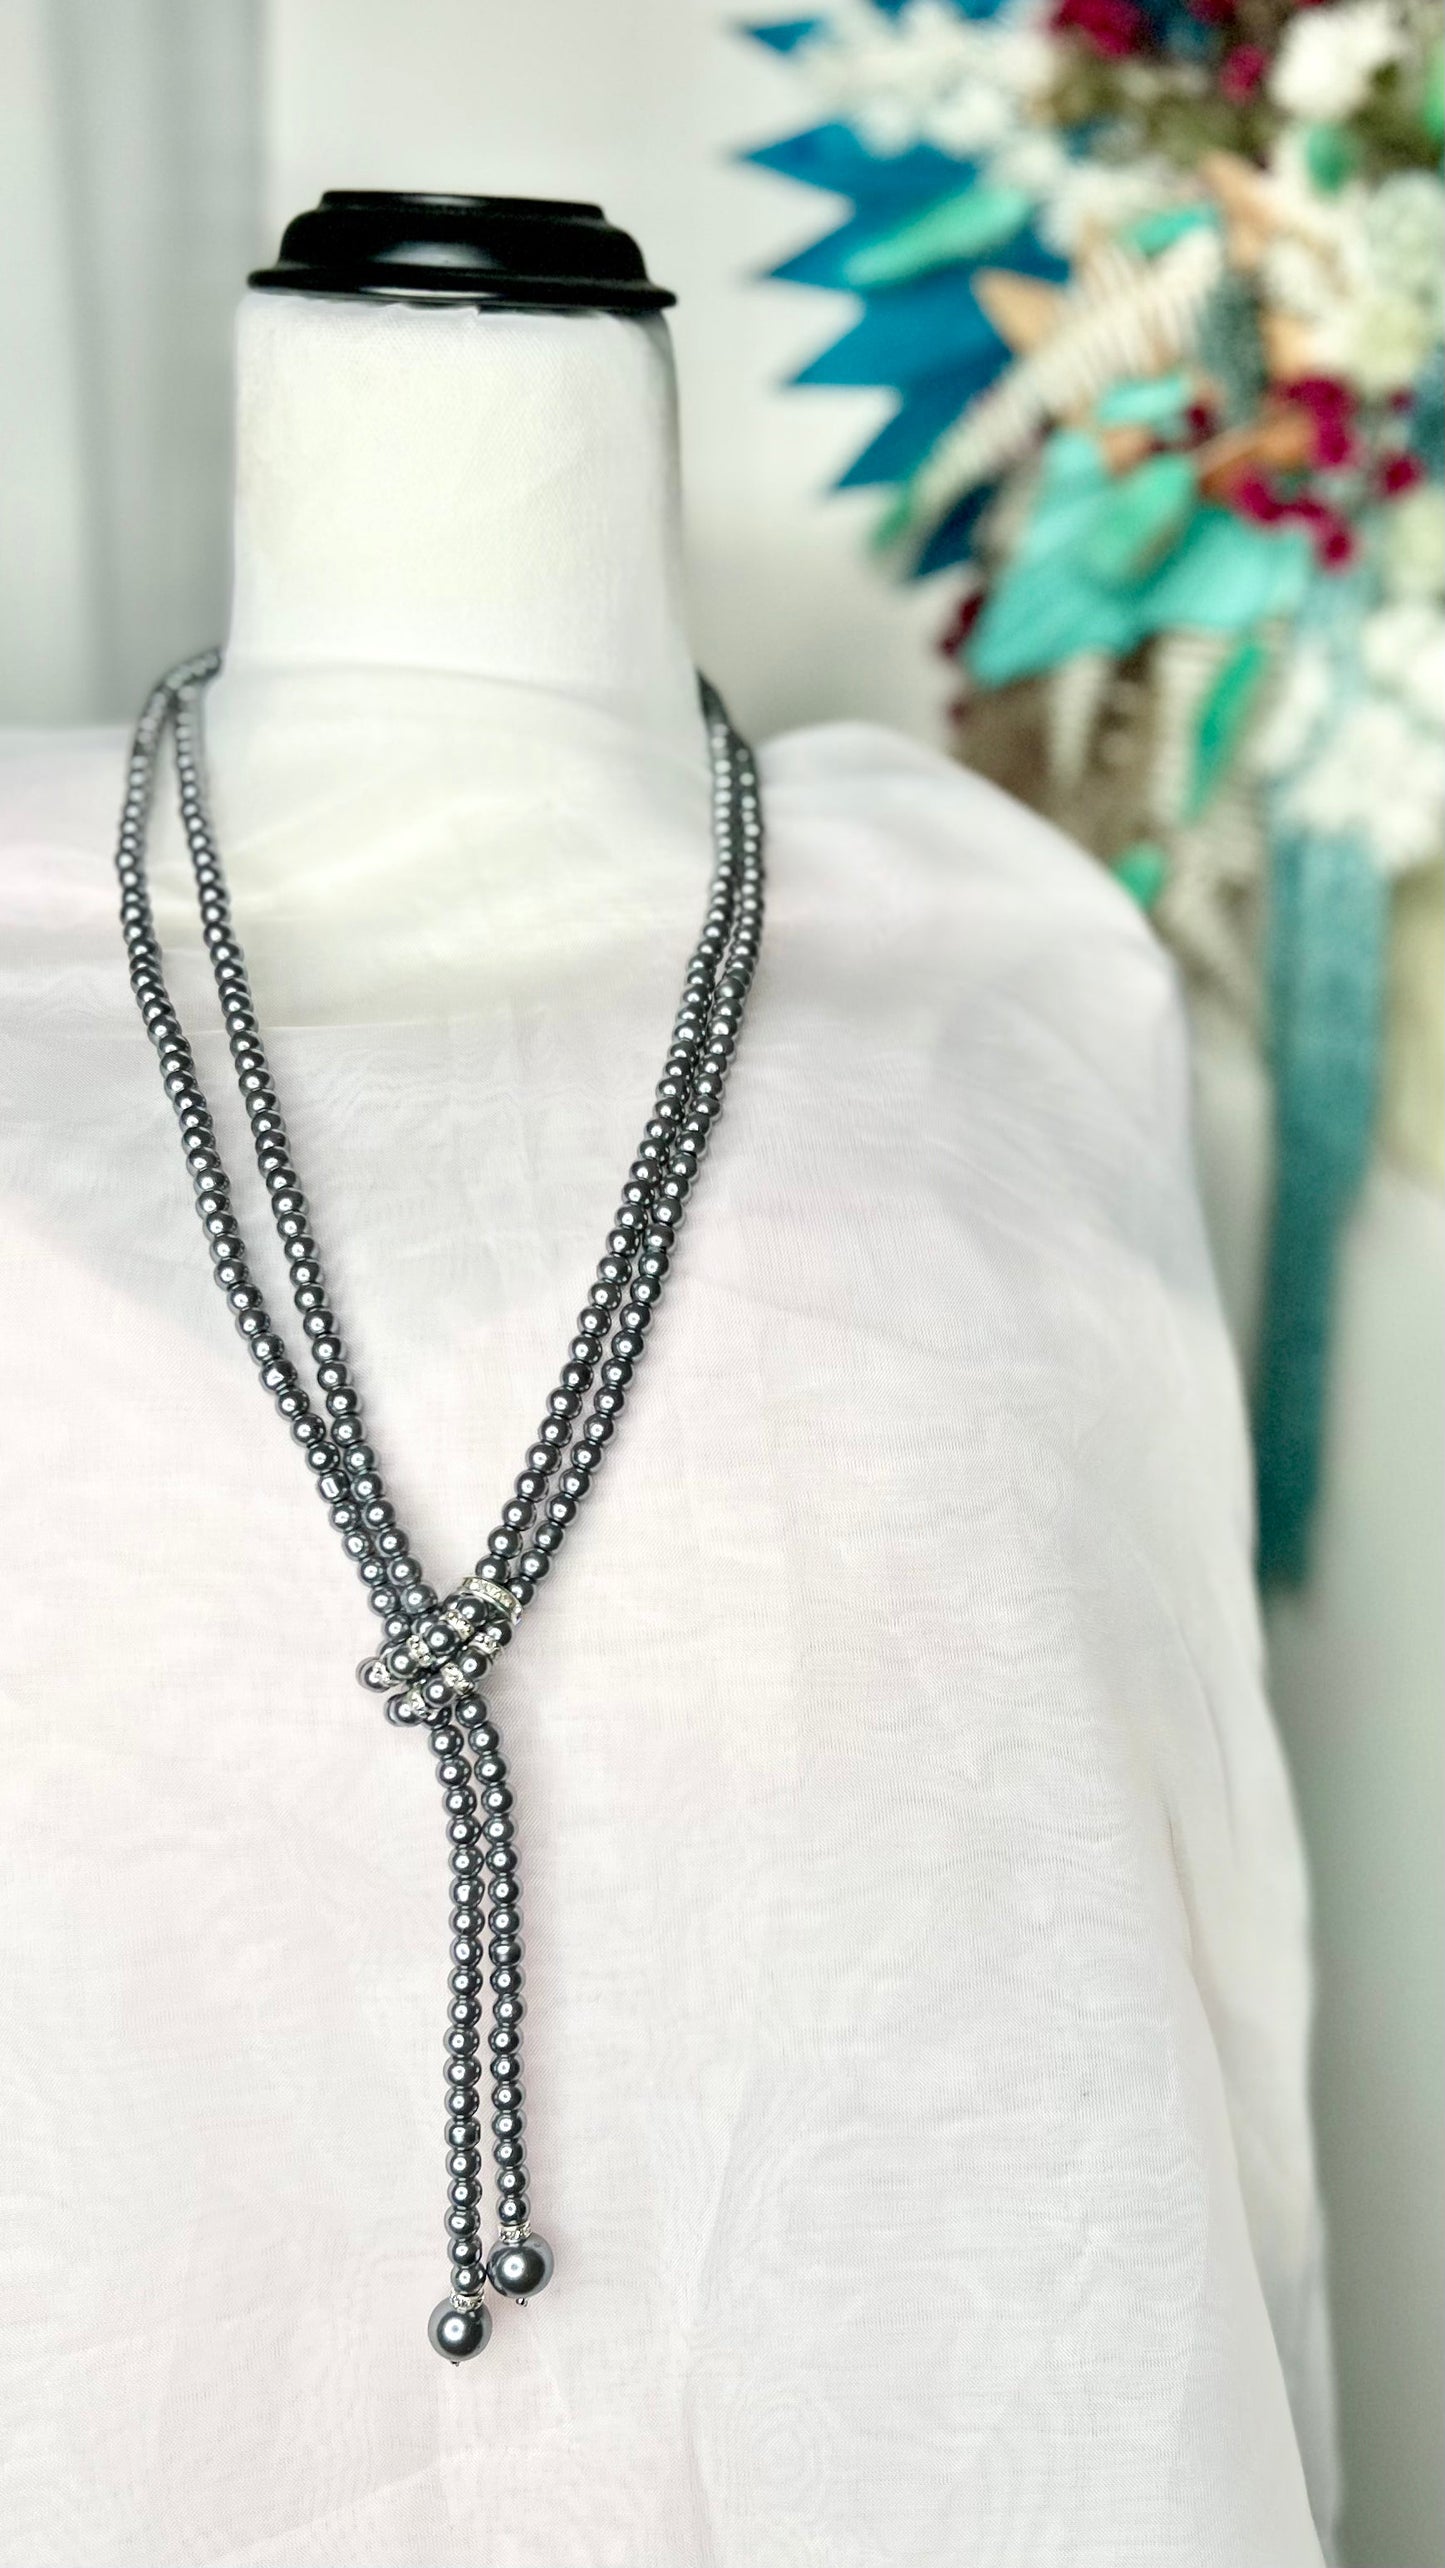 Gatsby Necklace - Pearl Strand: Our beaded necklaces are the perfect addition to your next Gatsby inspired event. These gorgeous designs can also be incorporated into modern outfit
This stunning de - Ciao Bella Dresses 